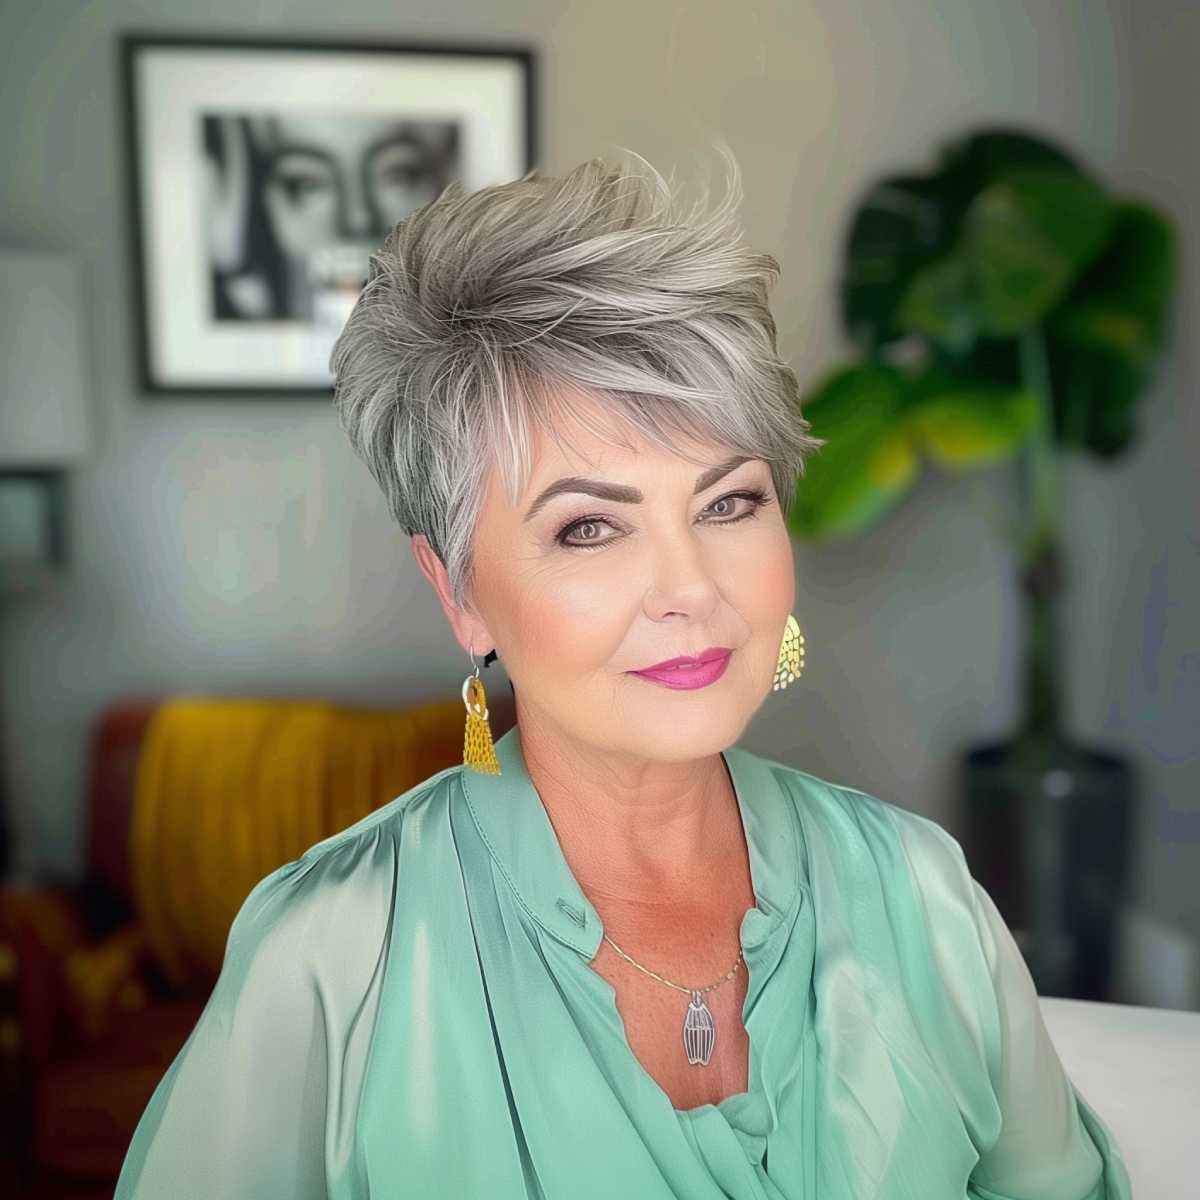 A woman with a short, stylish haircut featuring a voluminous top and soft grey tones.